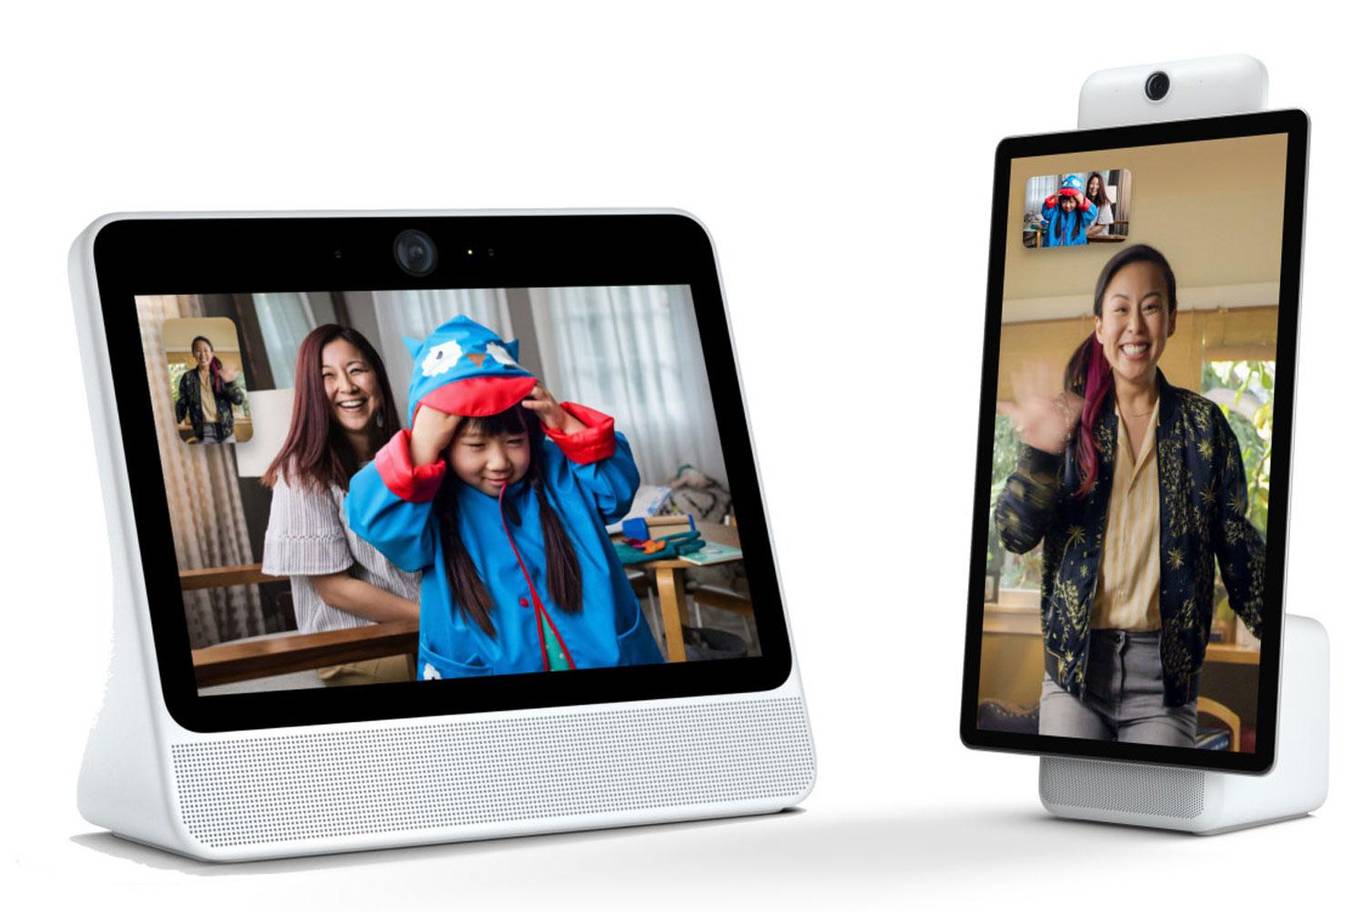 Facebook Portal: video calling with a camera that can track you